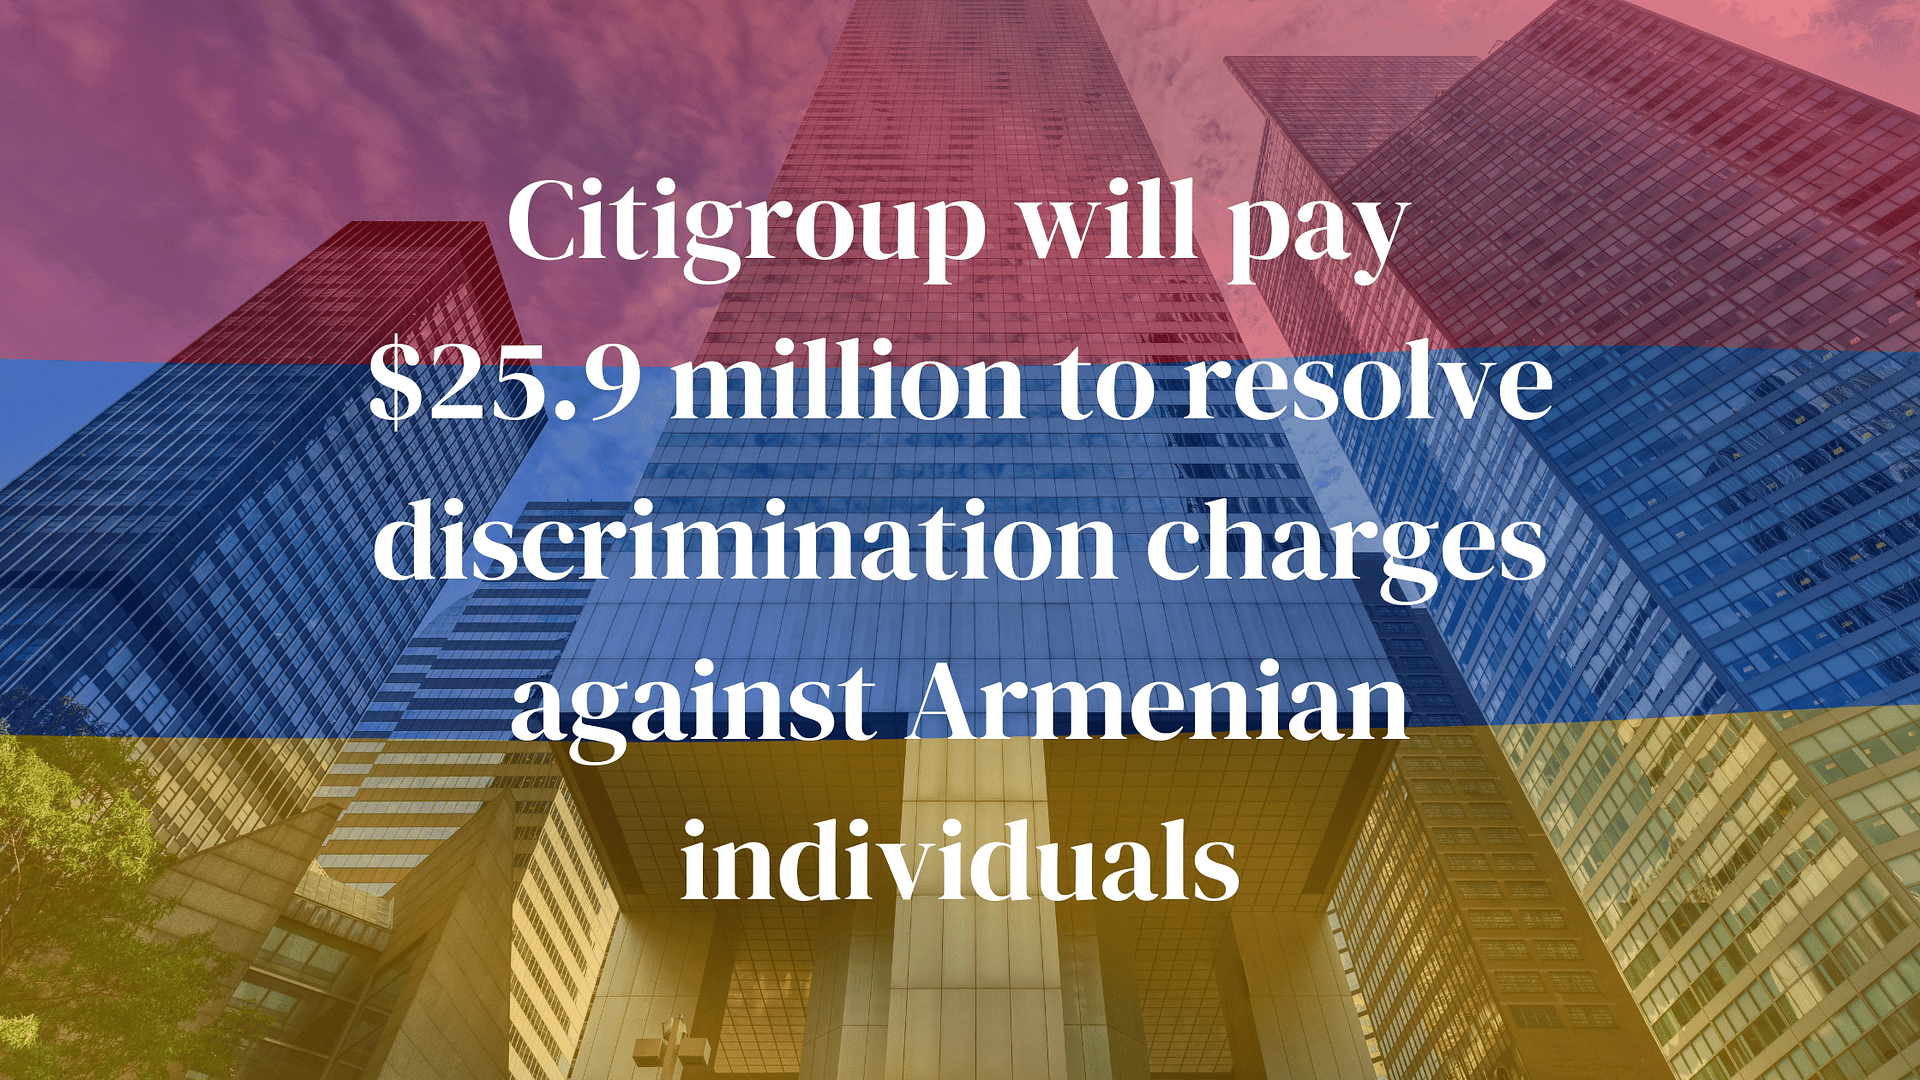 Citigroup will pay $259 million to resolve discrimination charges against Armenian individuals